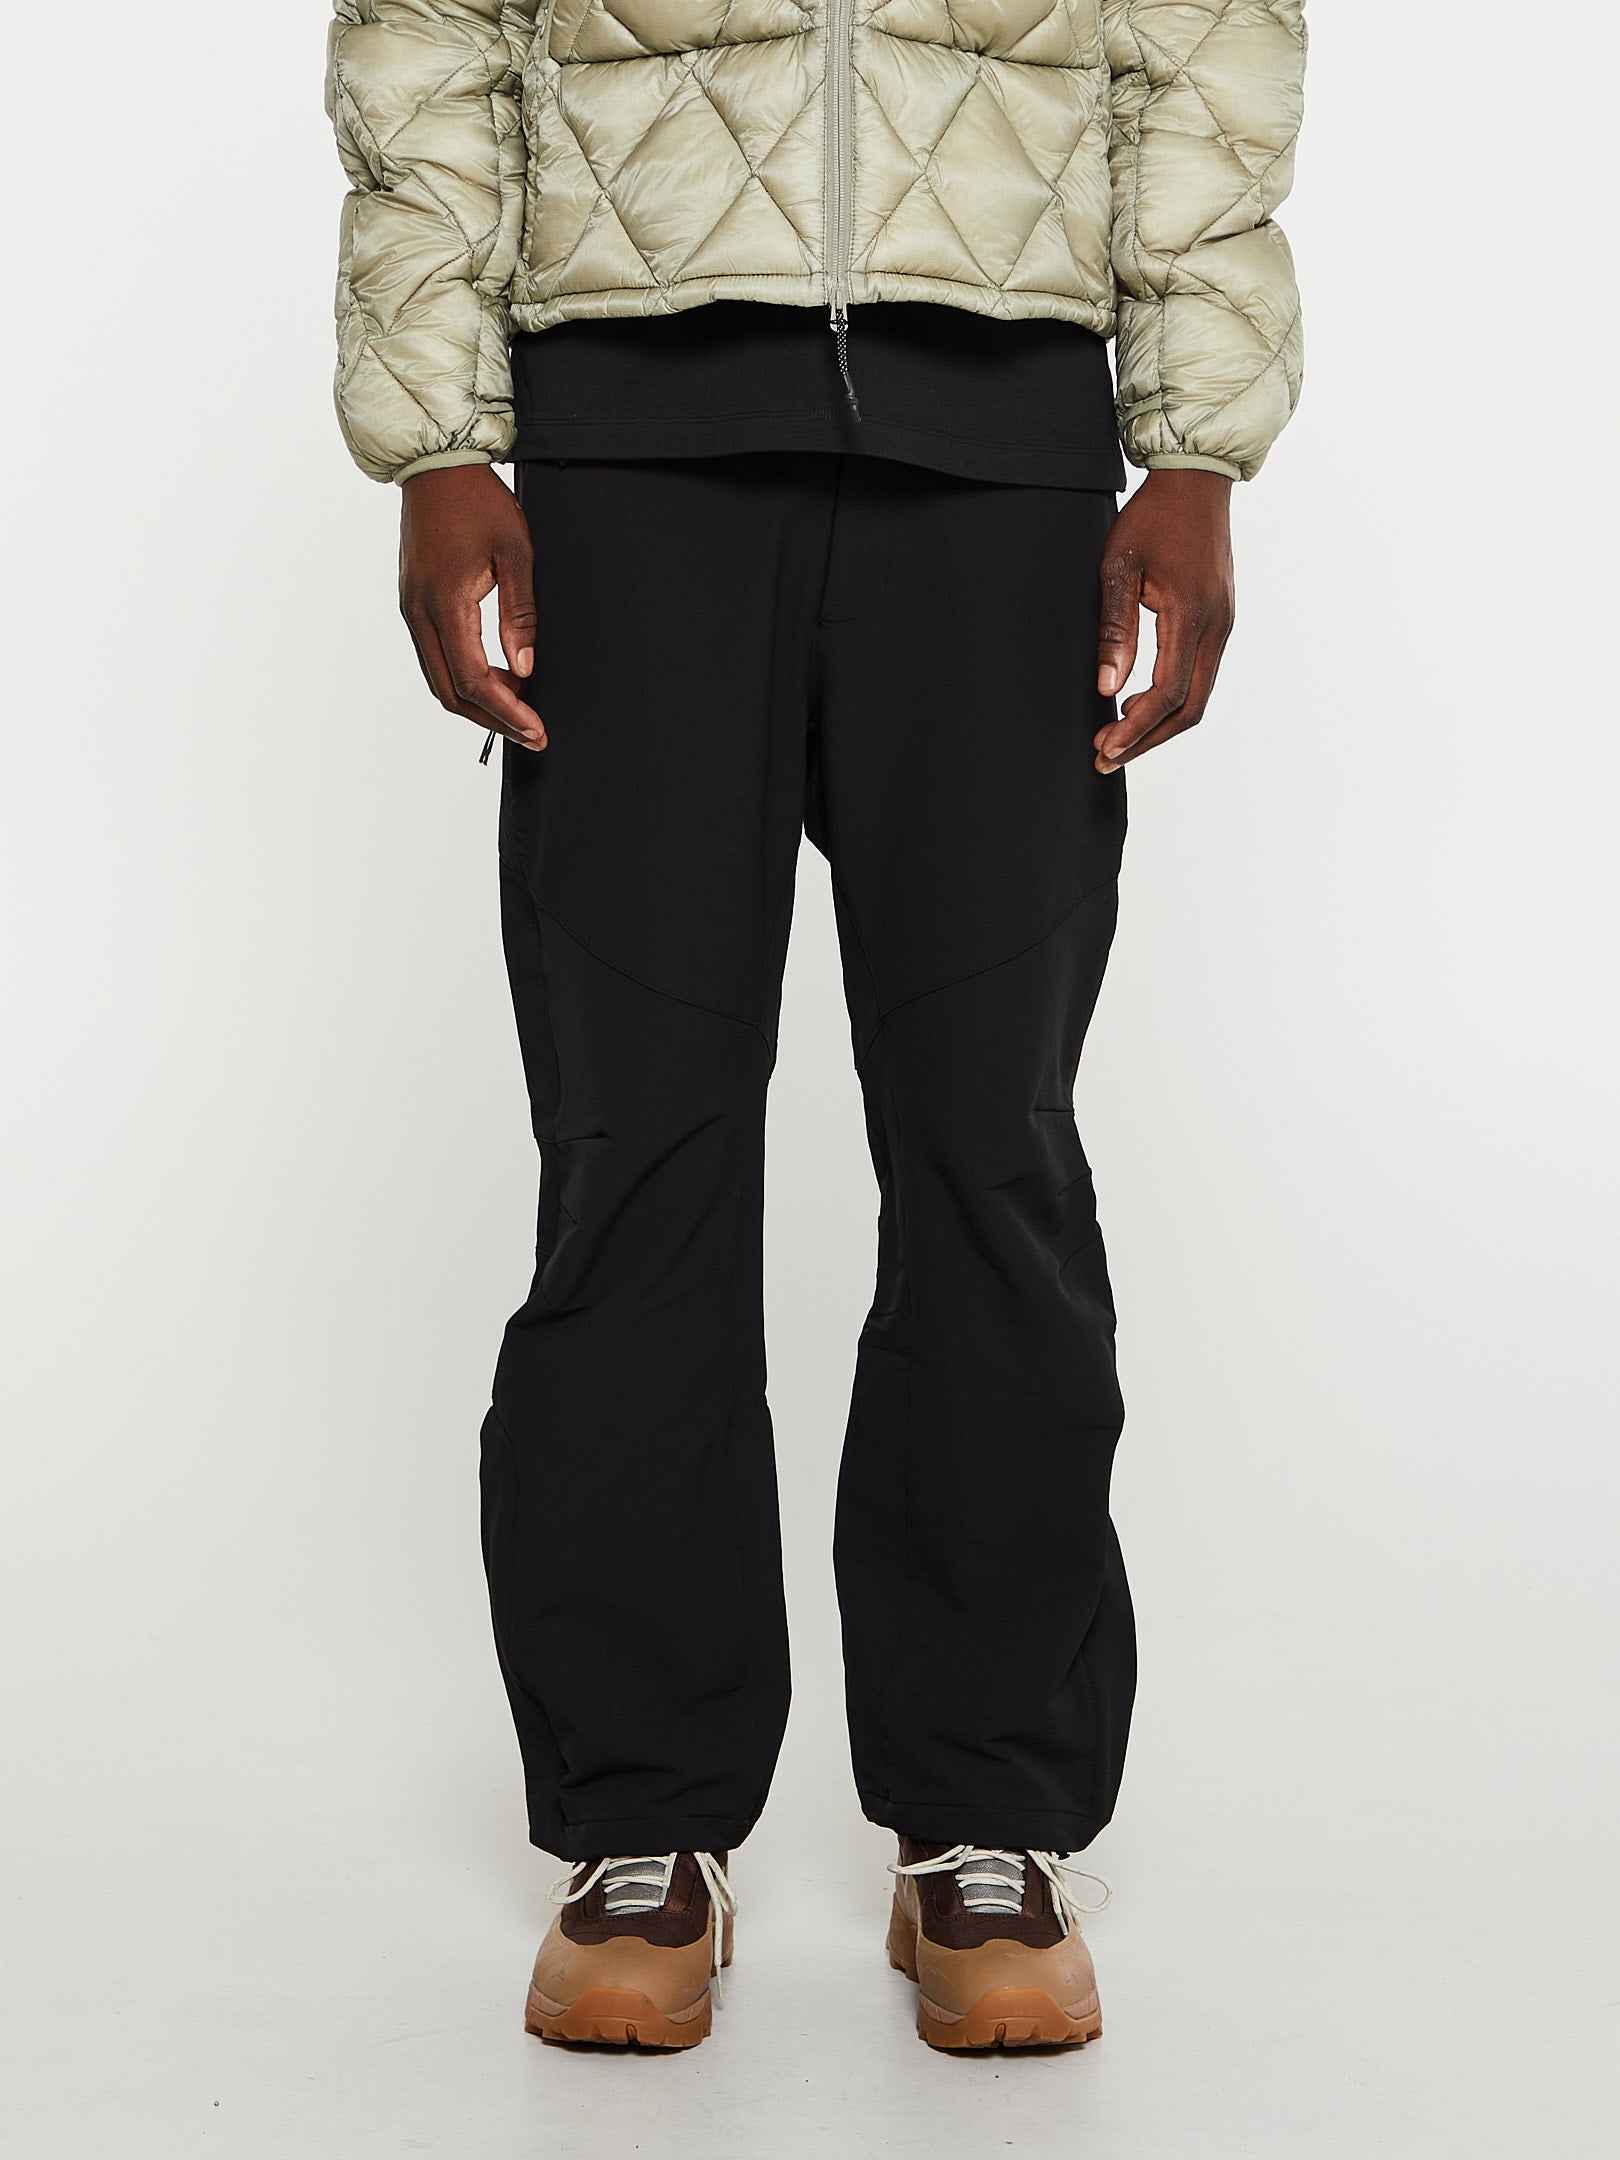 ROA - Technical Softshell Trousers in Black